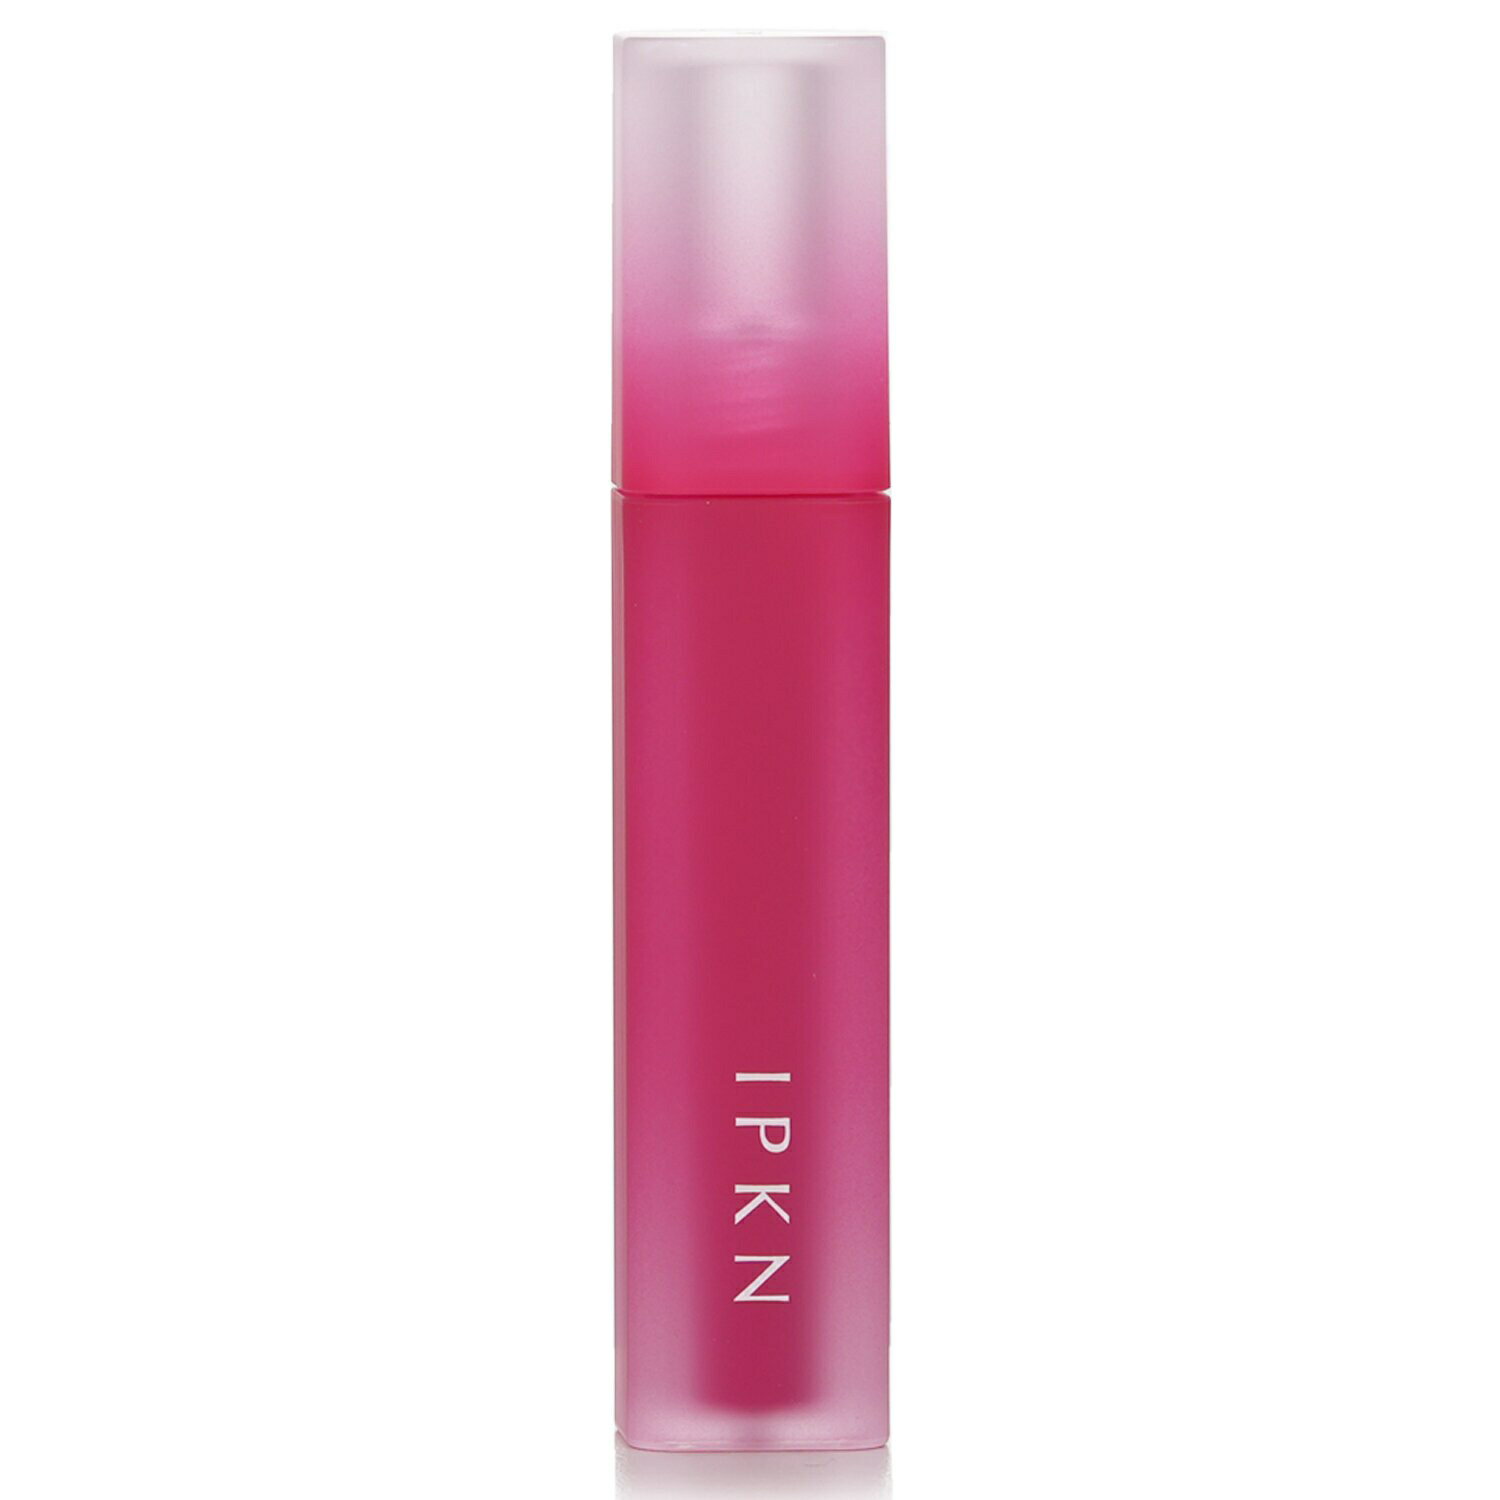 IPKN リップグロス 口紅 Personal Mood Water Fit Sheer Tint - # 03 Pure Berry 4.5g メイクアップ リ..